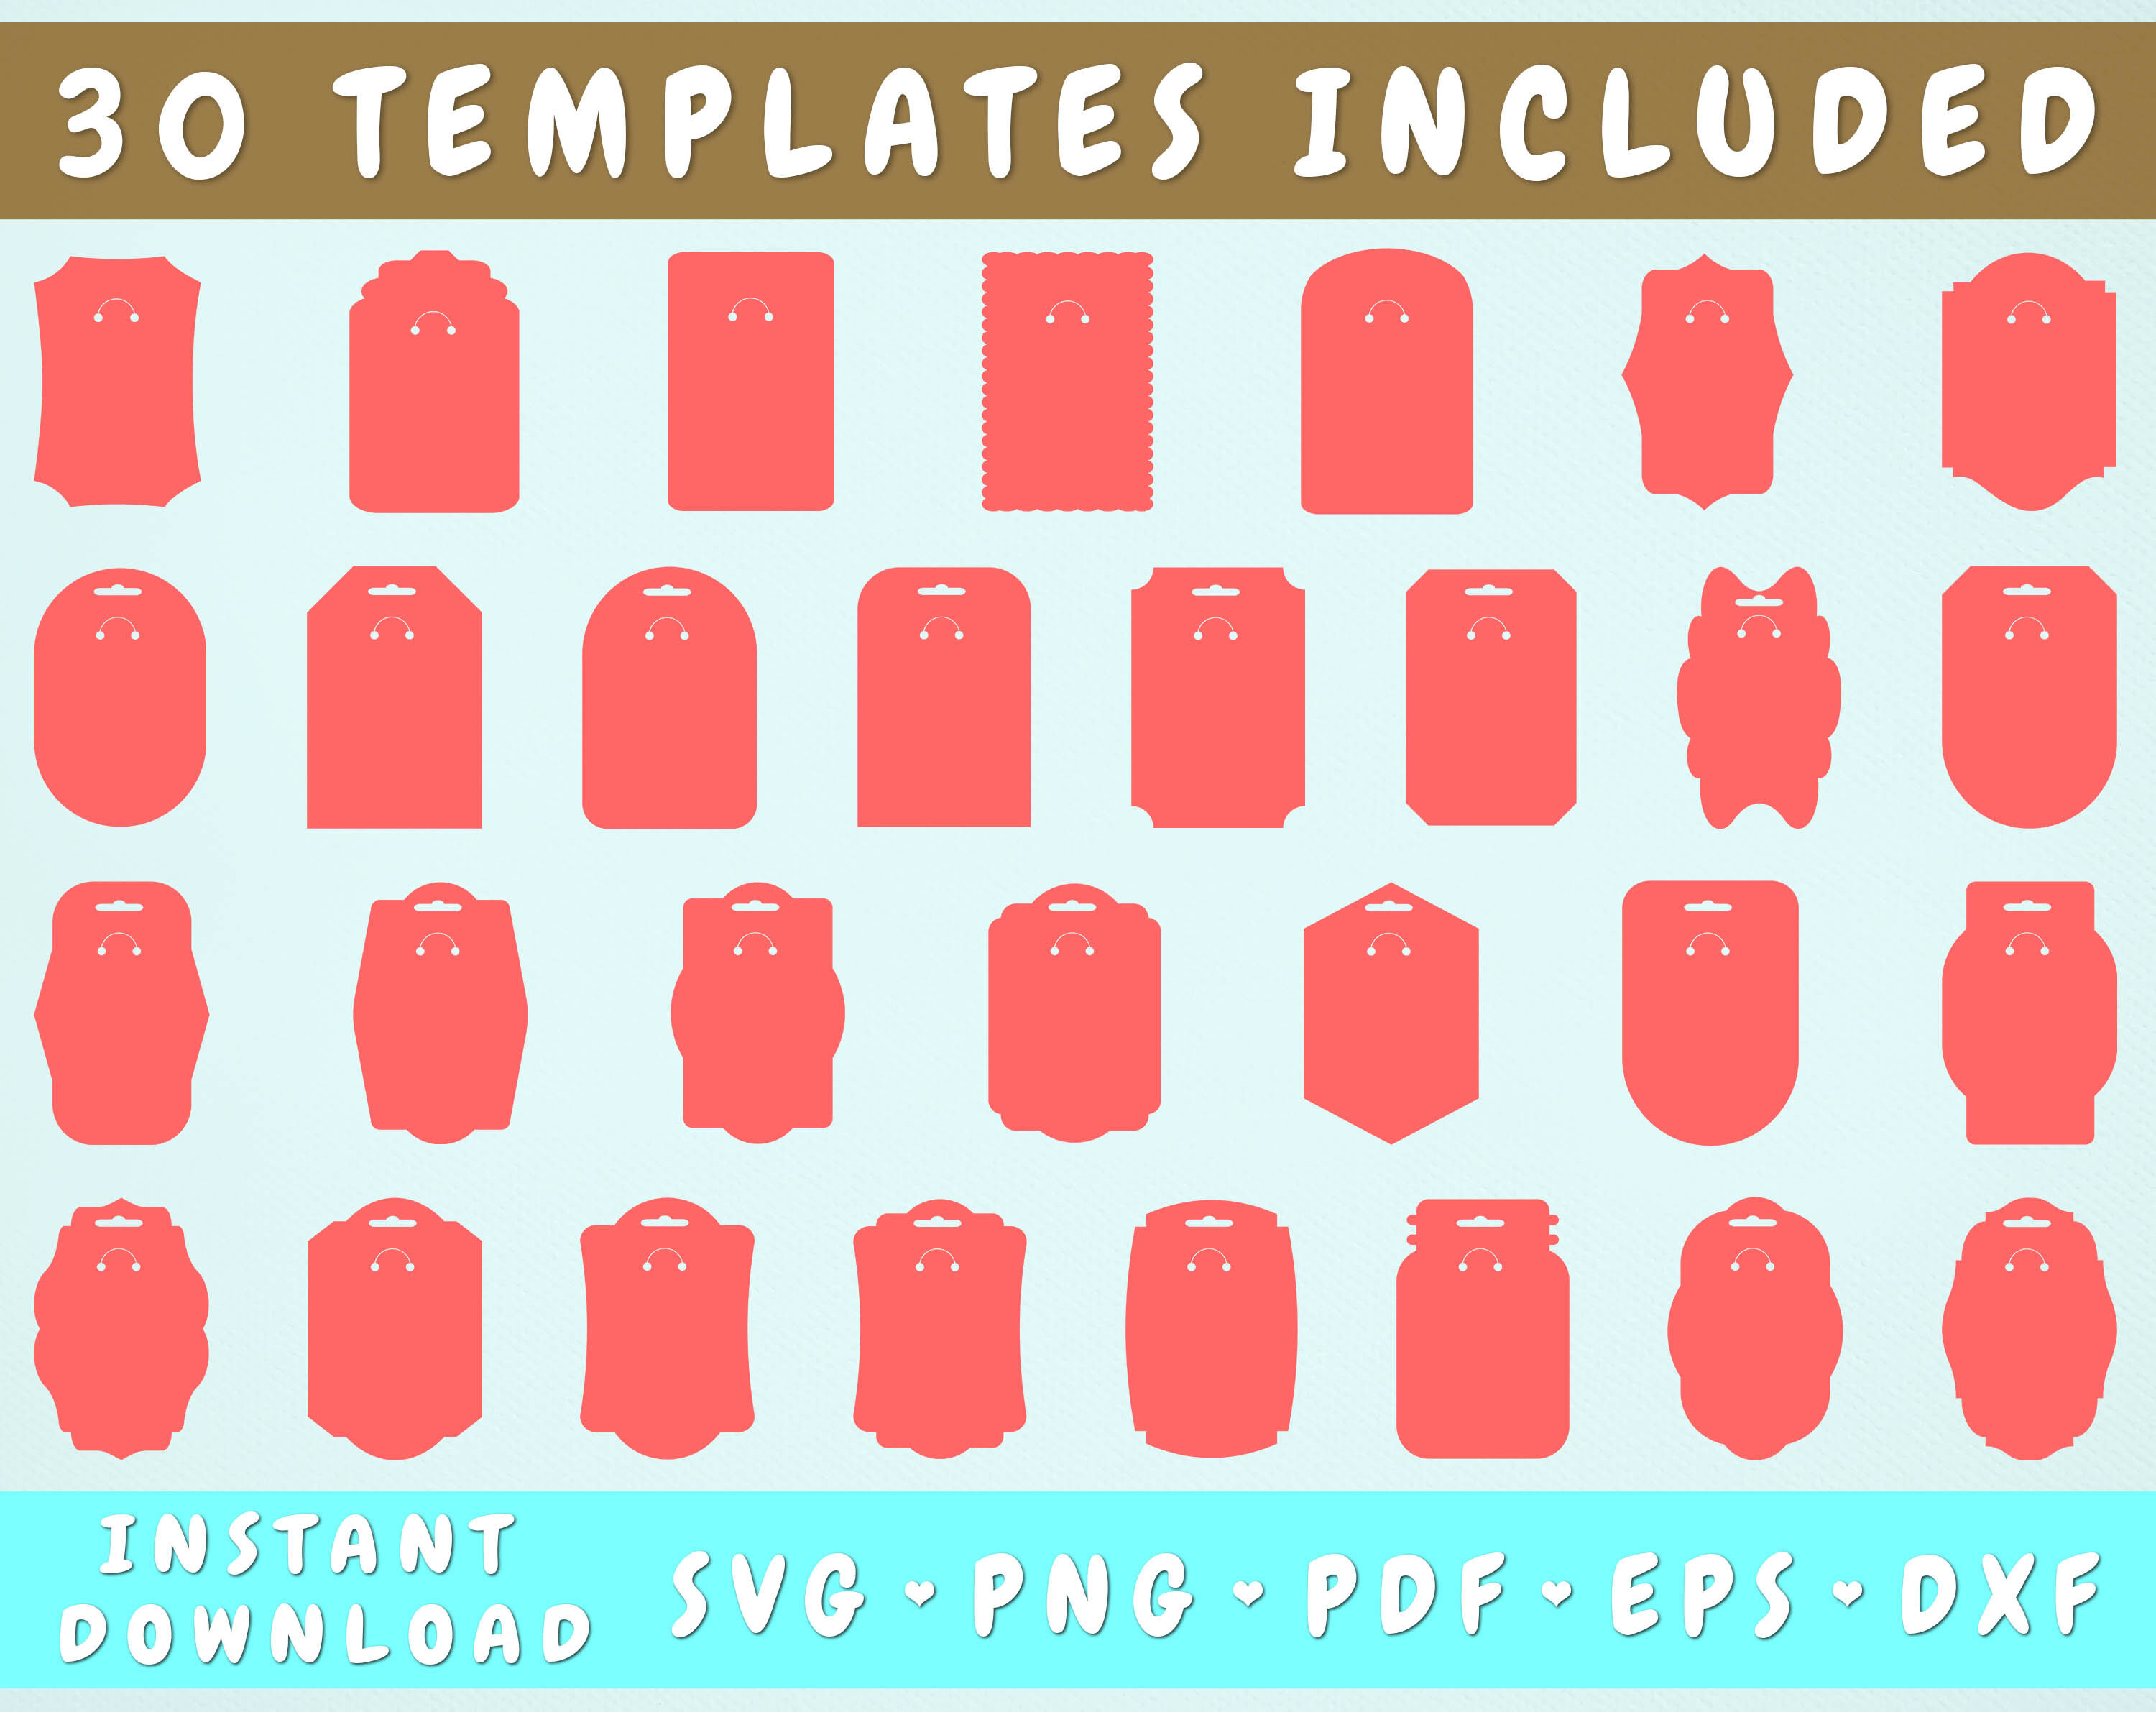 588+ Keychain Display Card Template Free - Download Free SVG Cut Files